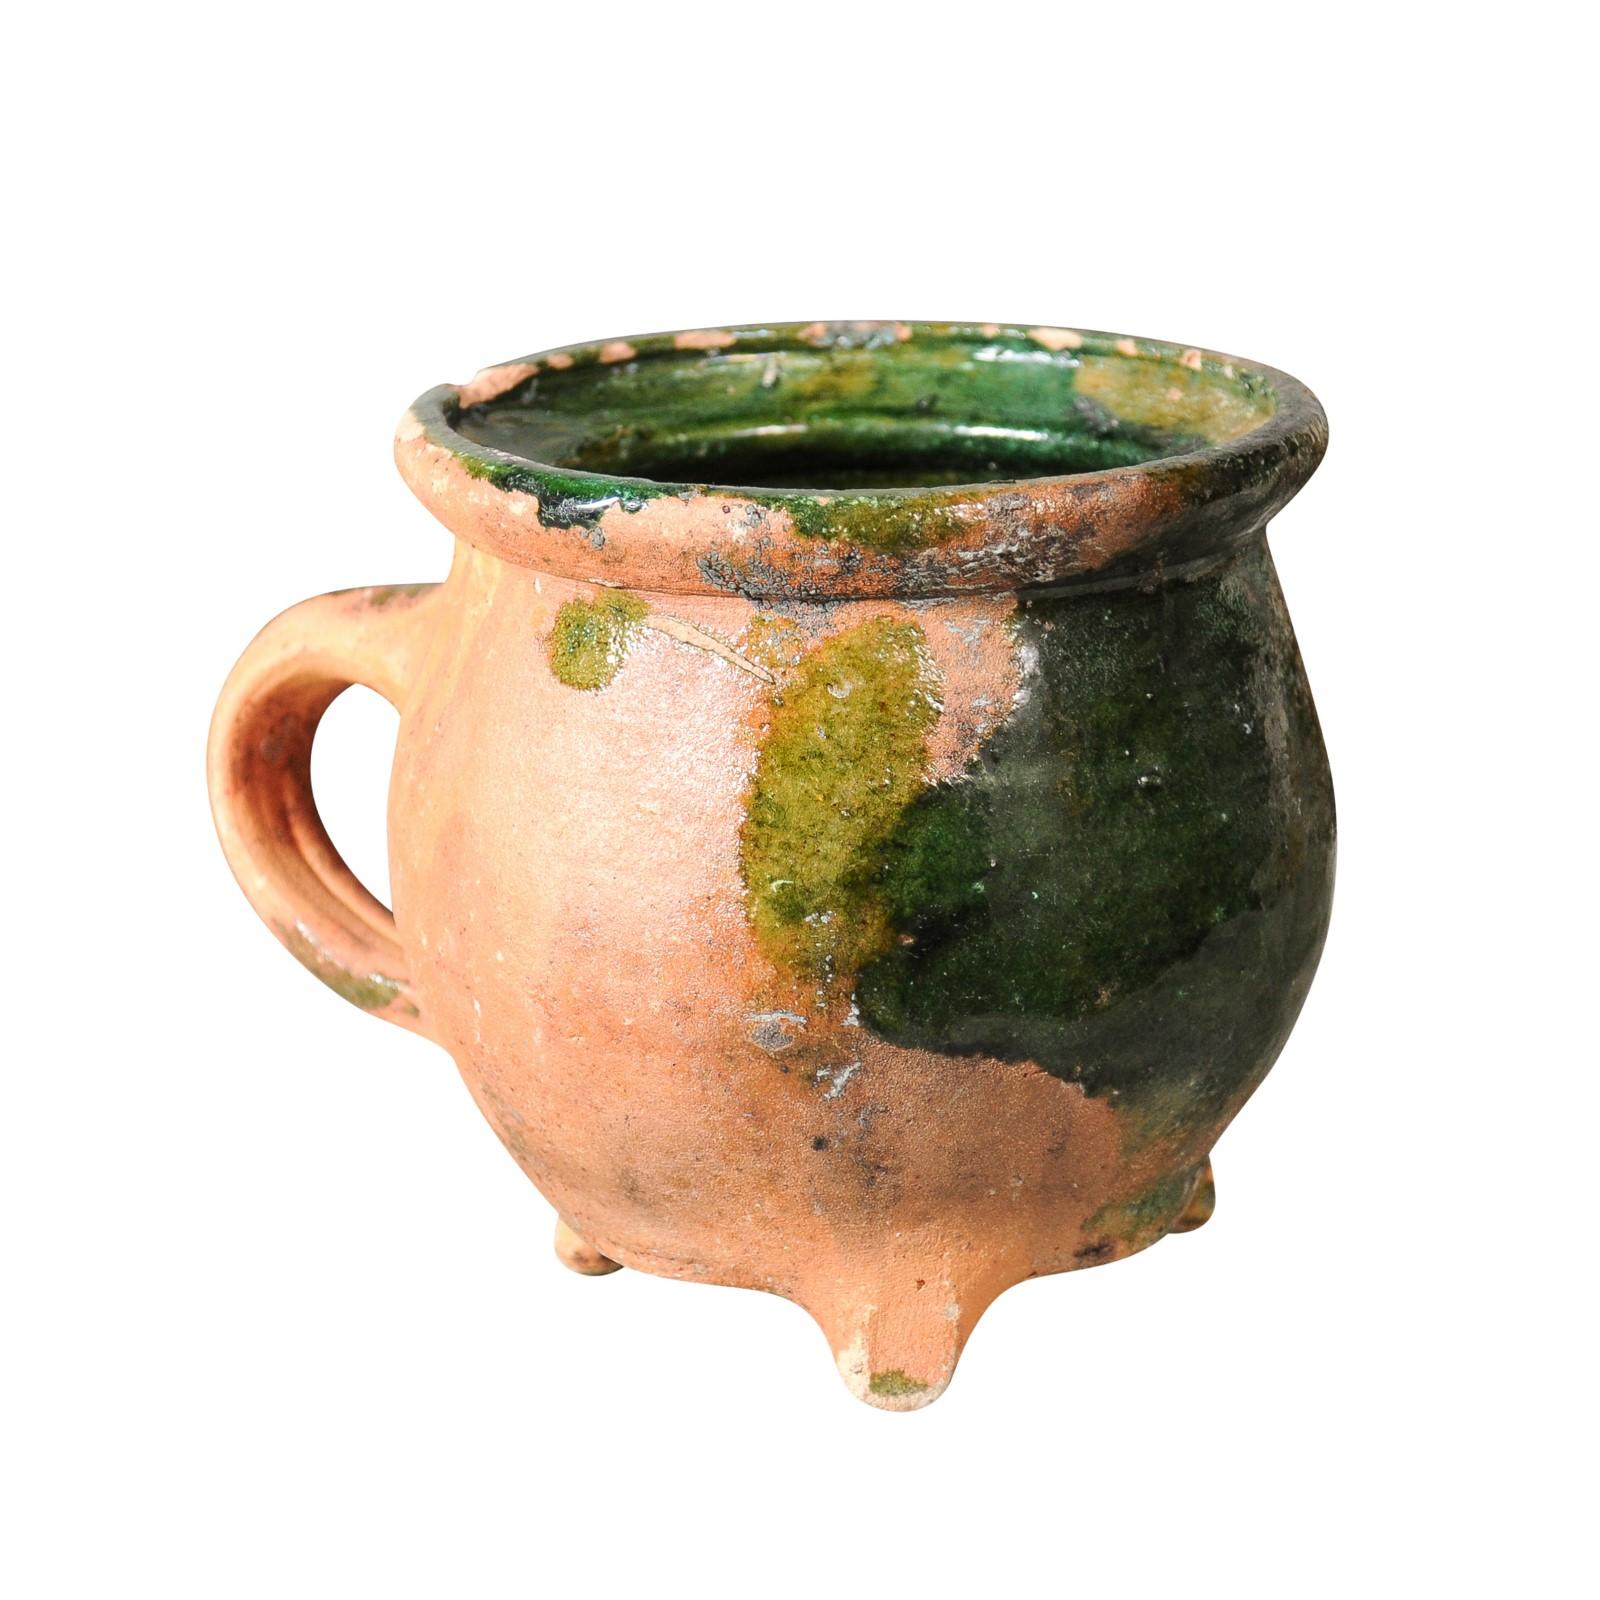 A French Provincial pottery from the 19th century with green glaze, molded handle, tripod base and weathered patina. Crafted with precision and artistry, this French Provincial pottery showcases a charming green glaze that adds a touch of elegance